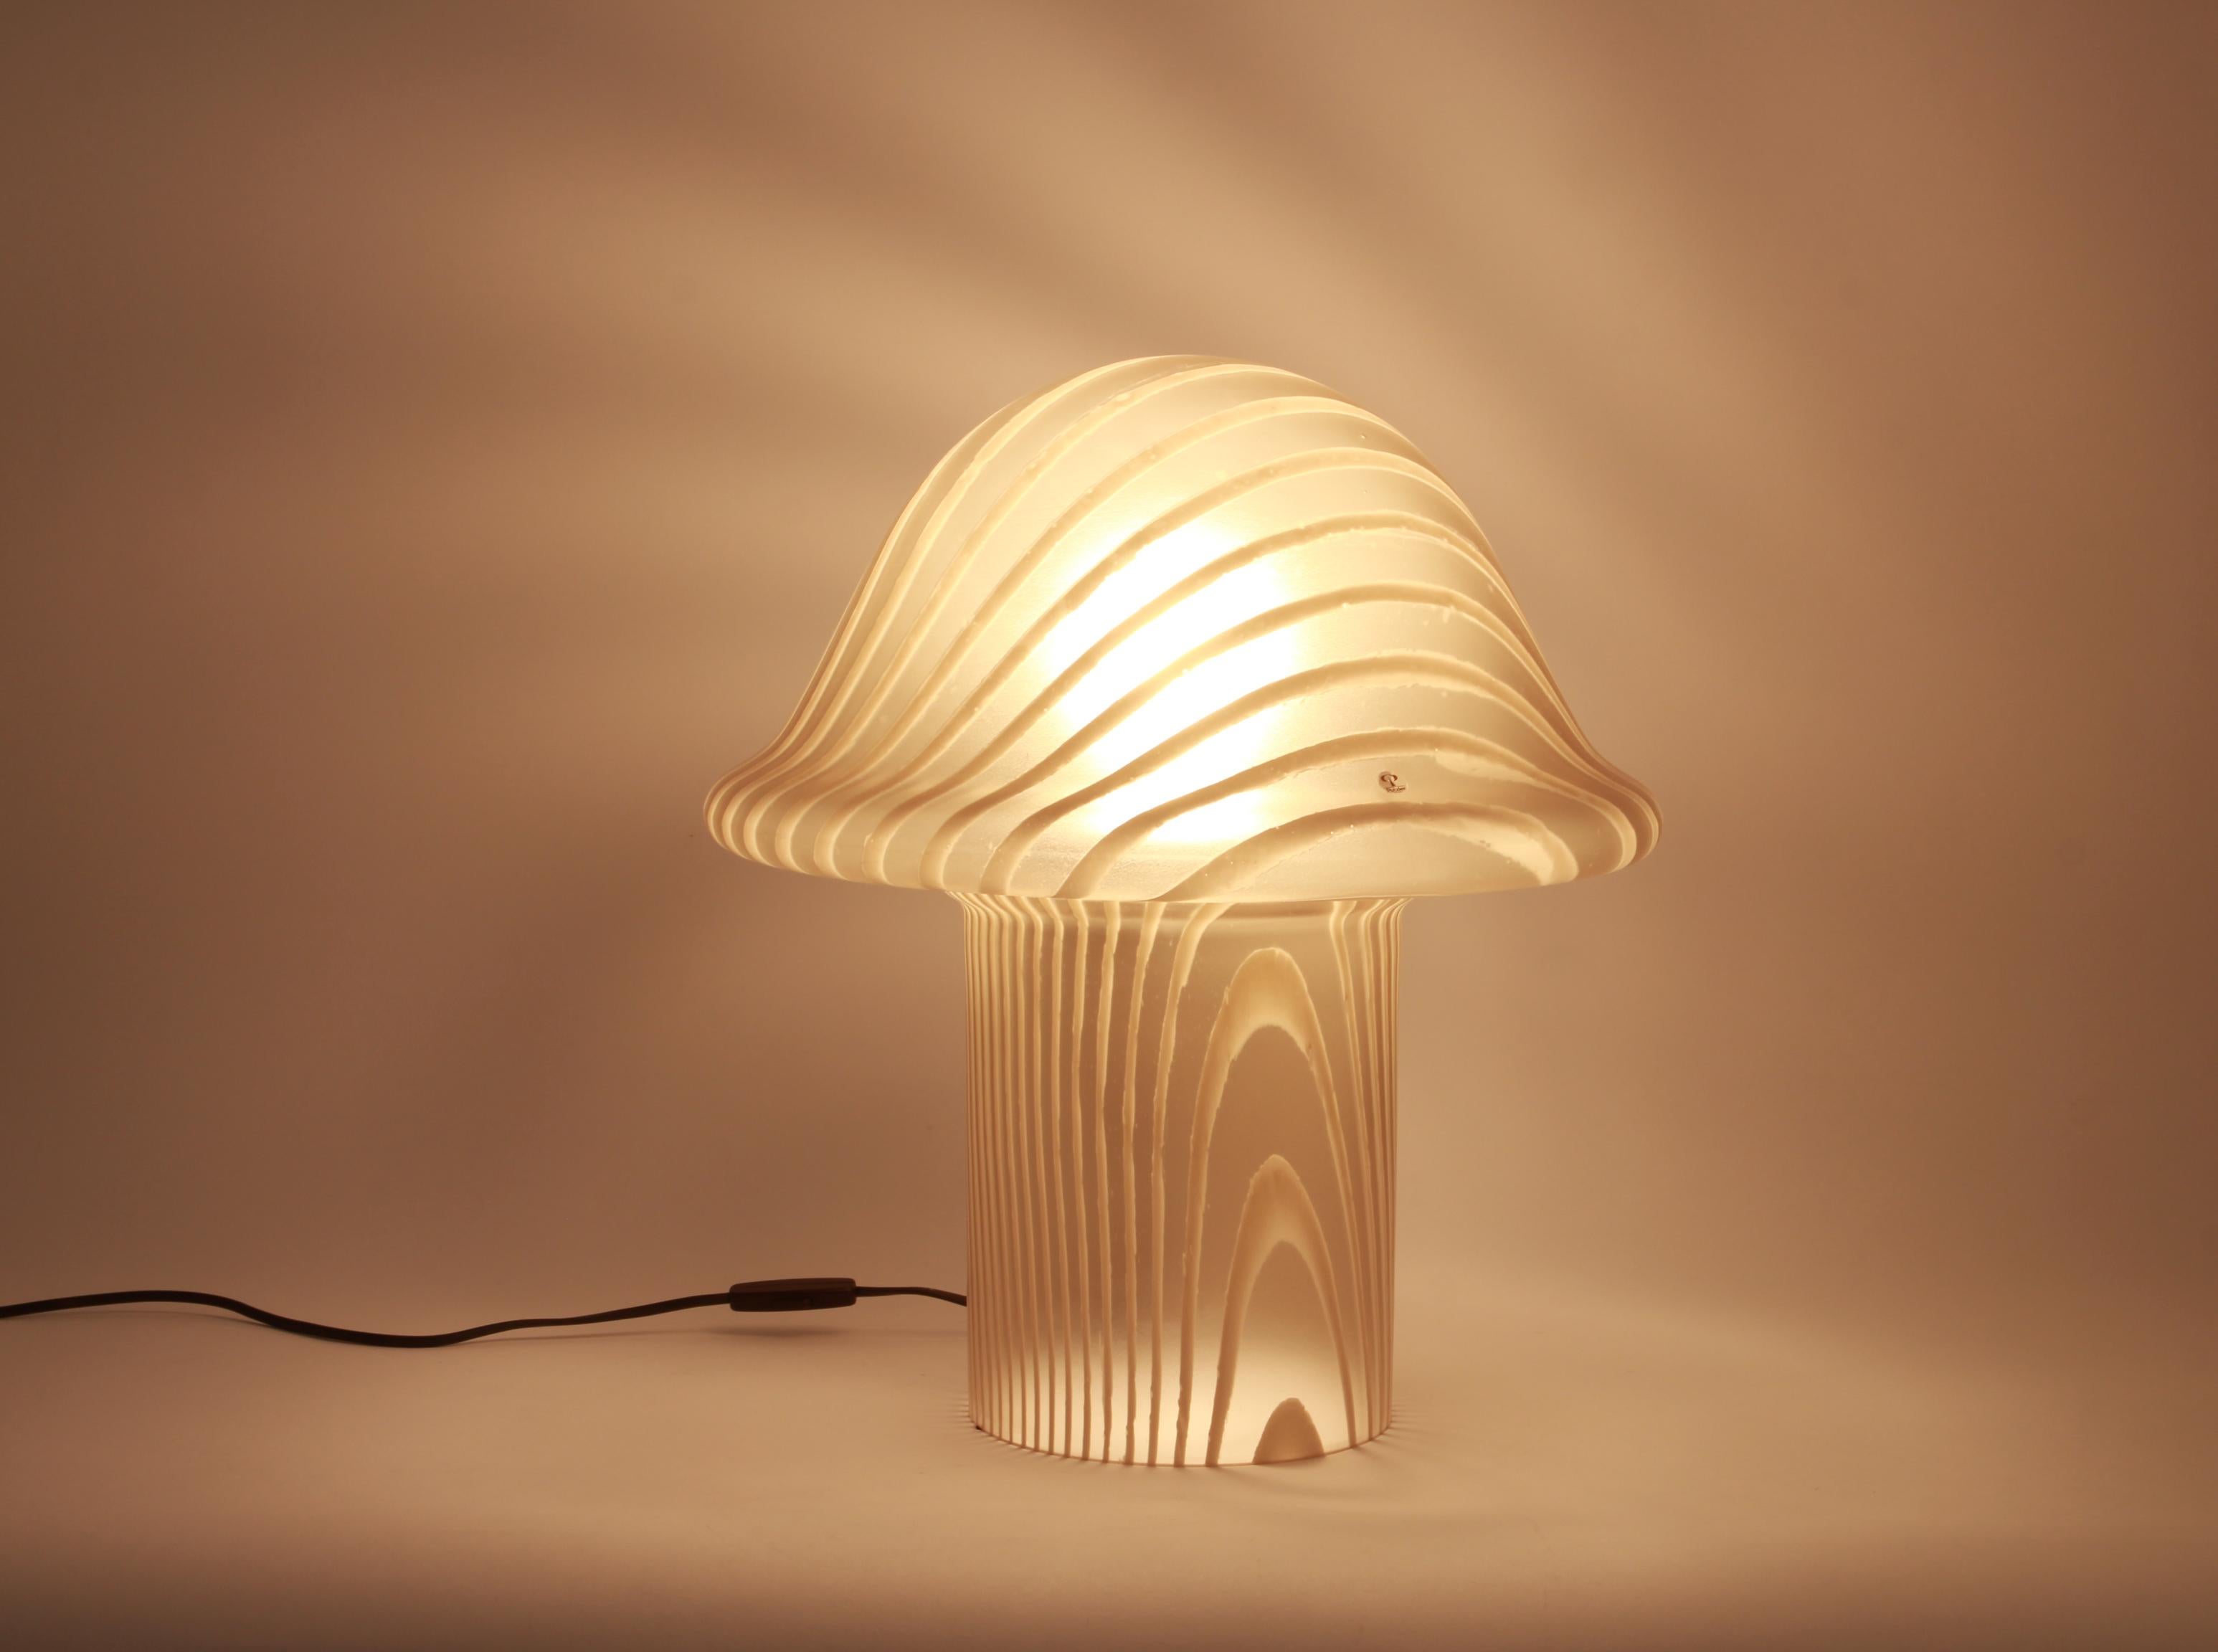 Wonderful mushroom table lamp by Peill & Putzler, Germany, 1970s. Made of a single piece.
Great glass body and its edgy quality contrast nicely with the smooth surface and shape of the mushroom. 

Measures: Large table lamp
Height 50 cm // 19.6